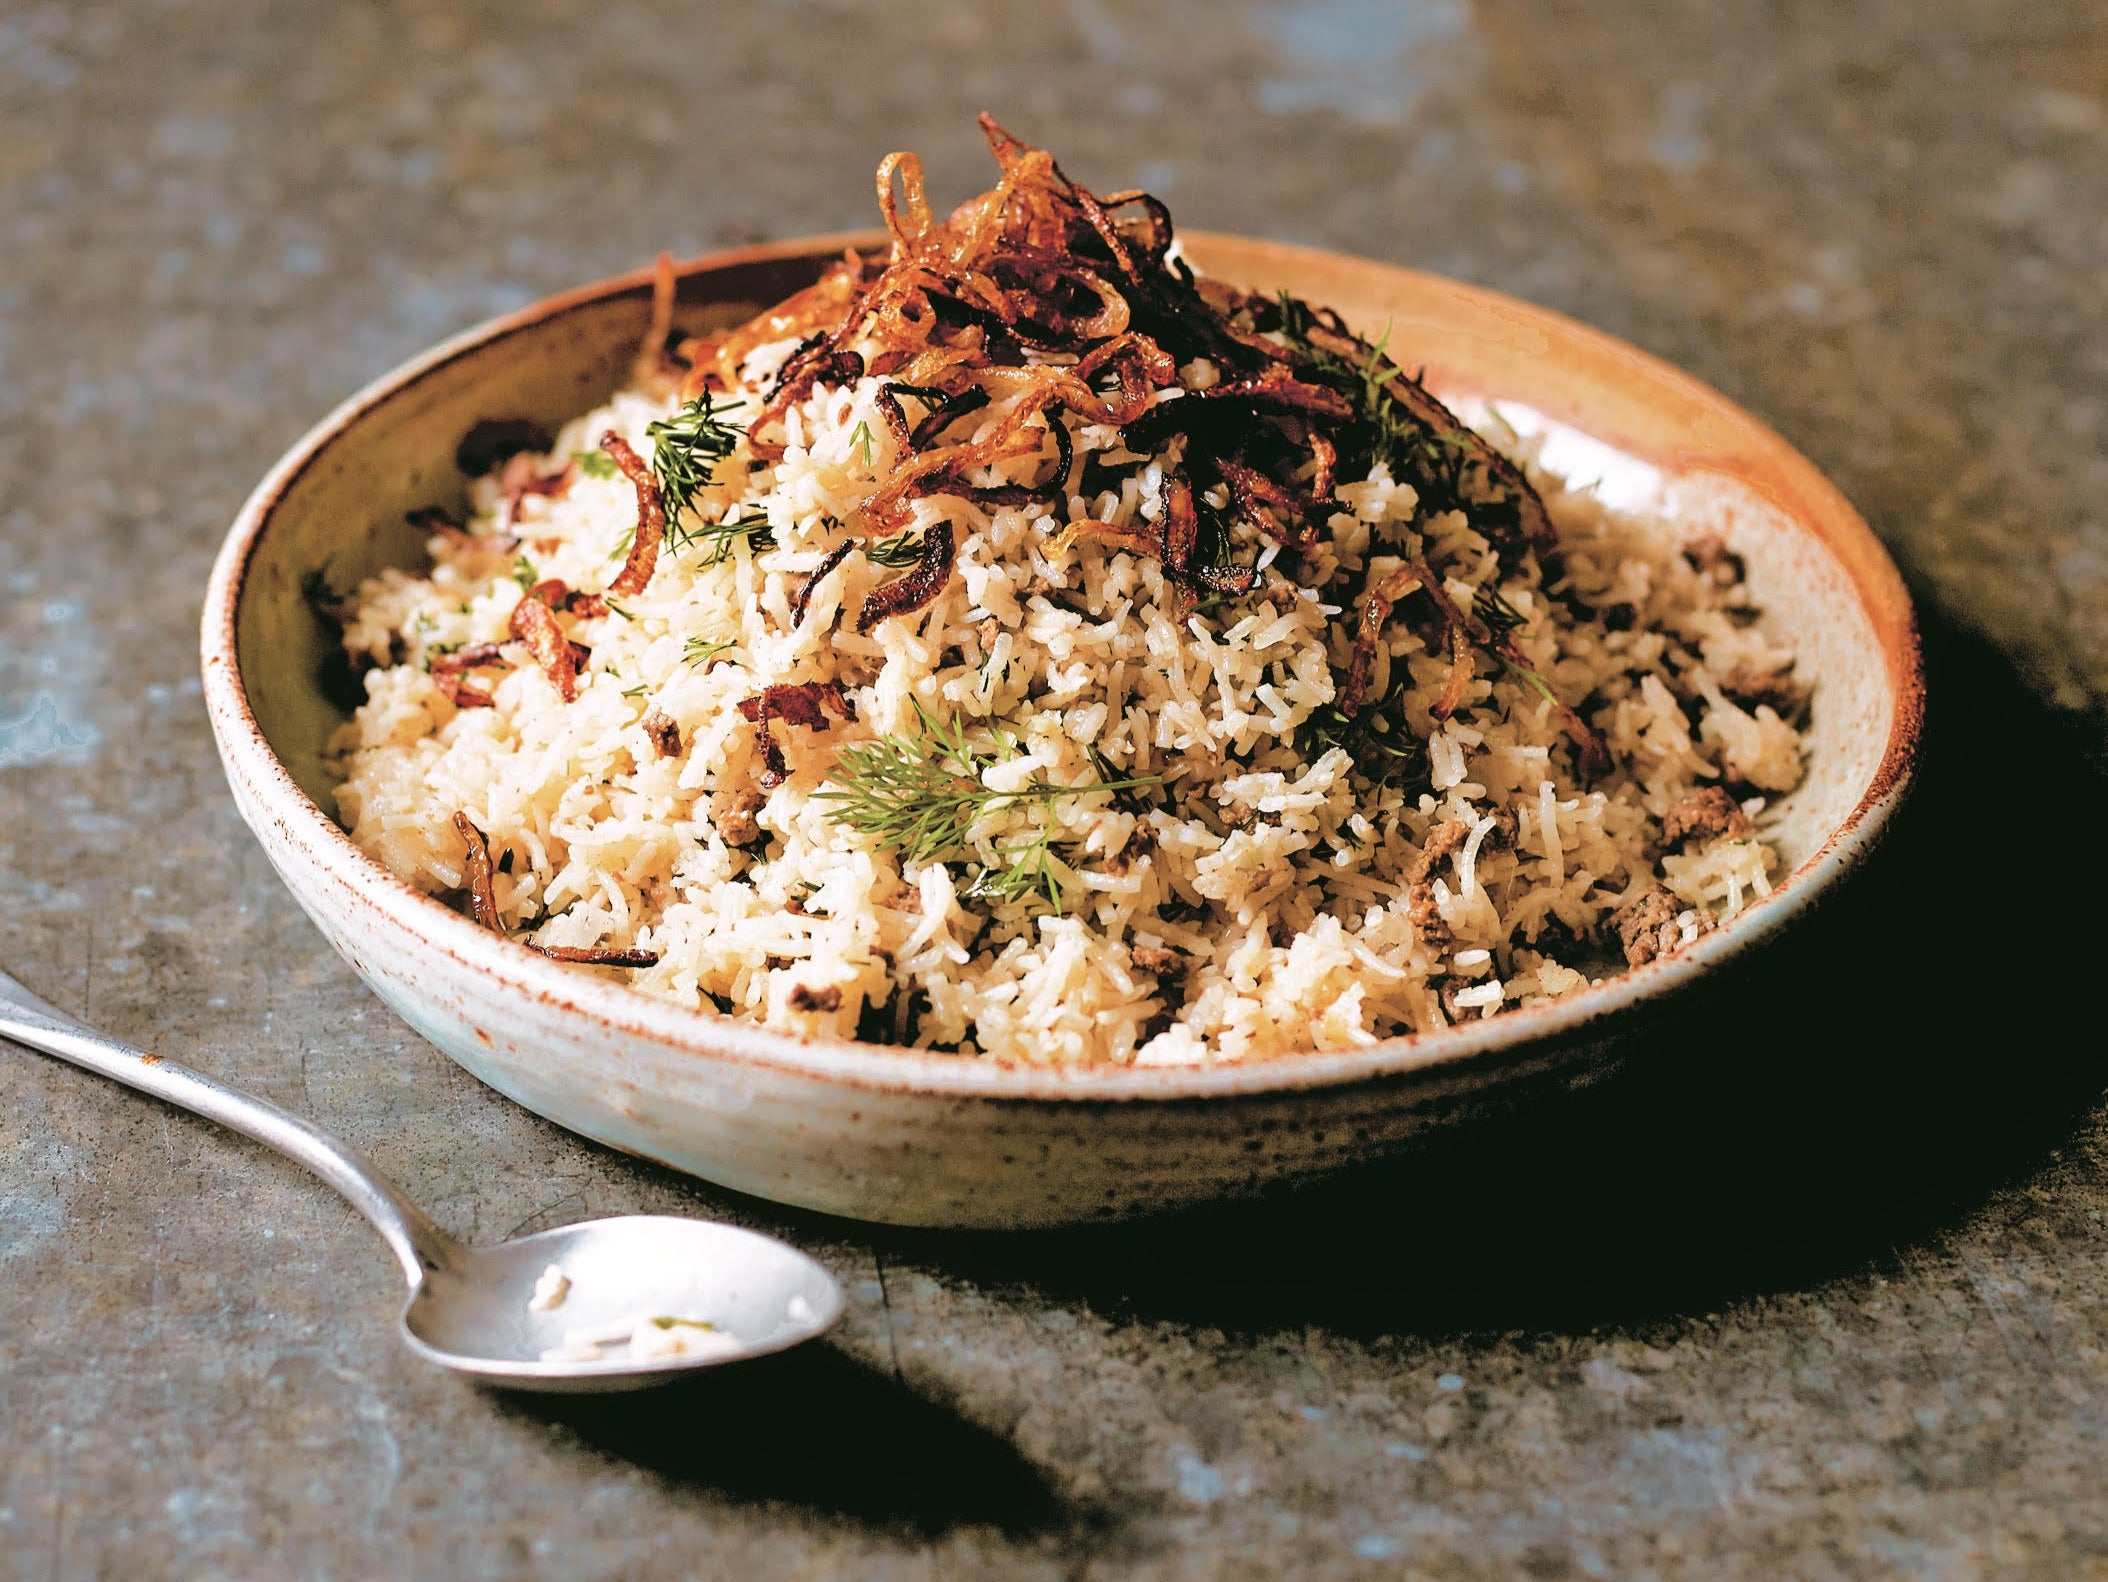 Be prepared: eating a balance of protein and carbohydrates is important while fasting – and a curry such as Asma Khan’s Keema Sau Pulao is a great source of protein that can be prepared with minimum effort